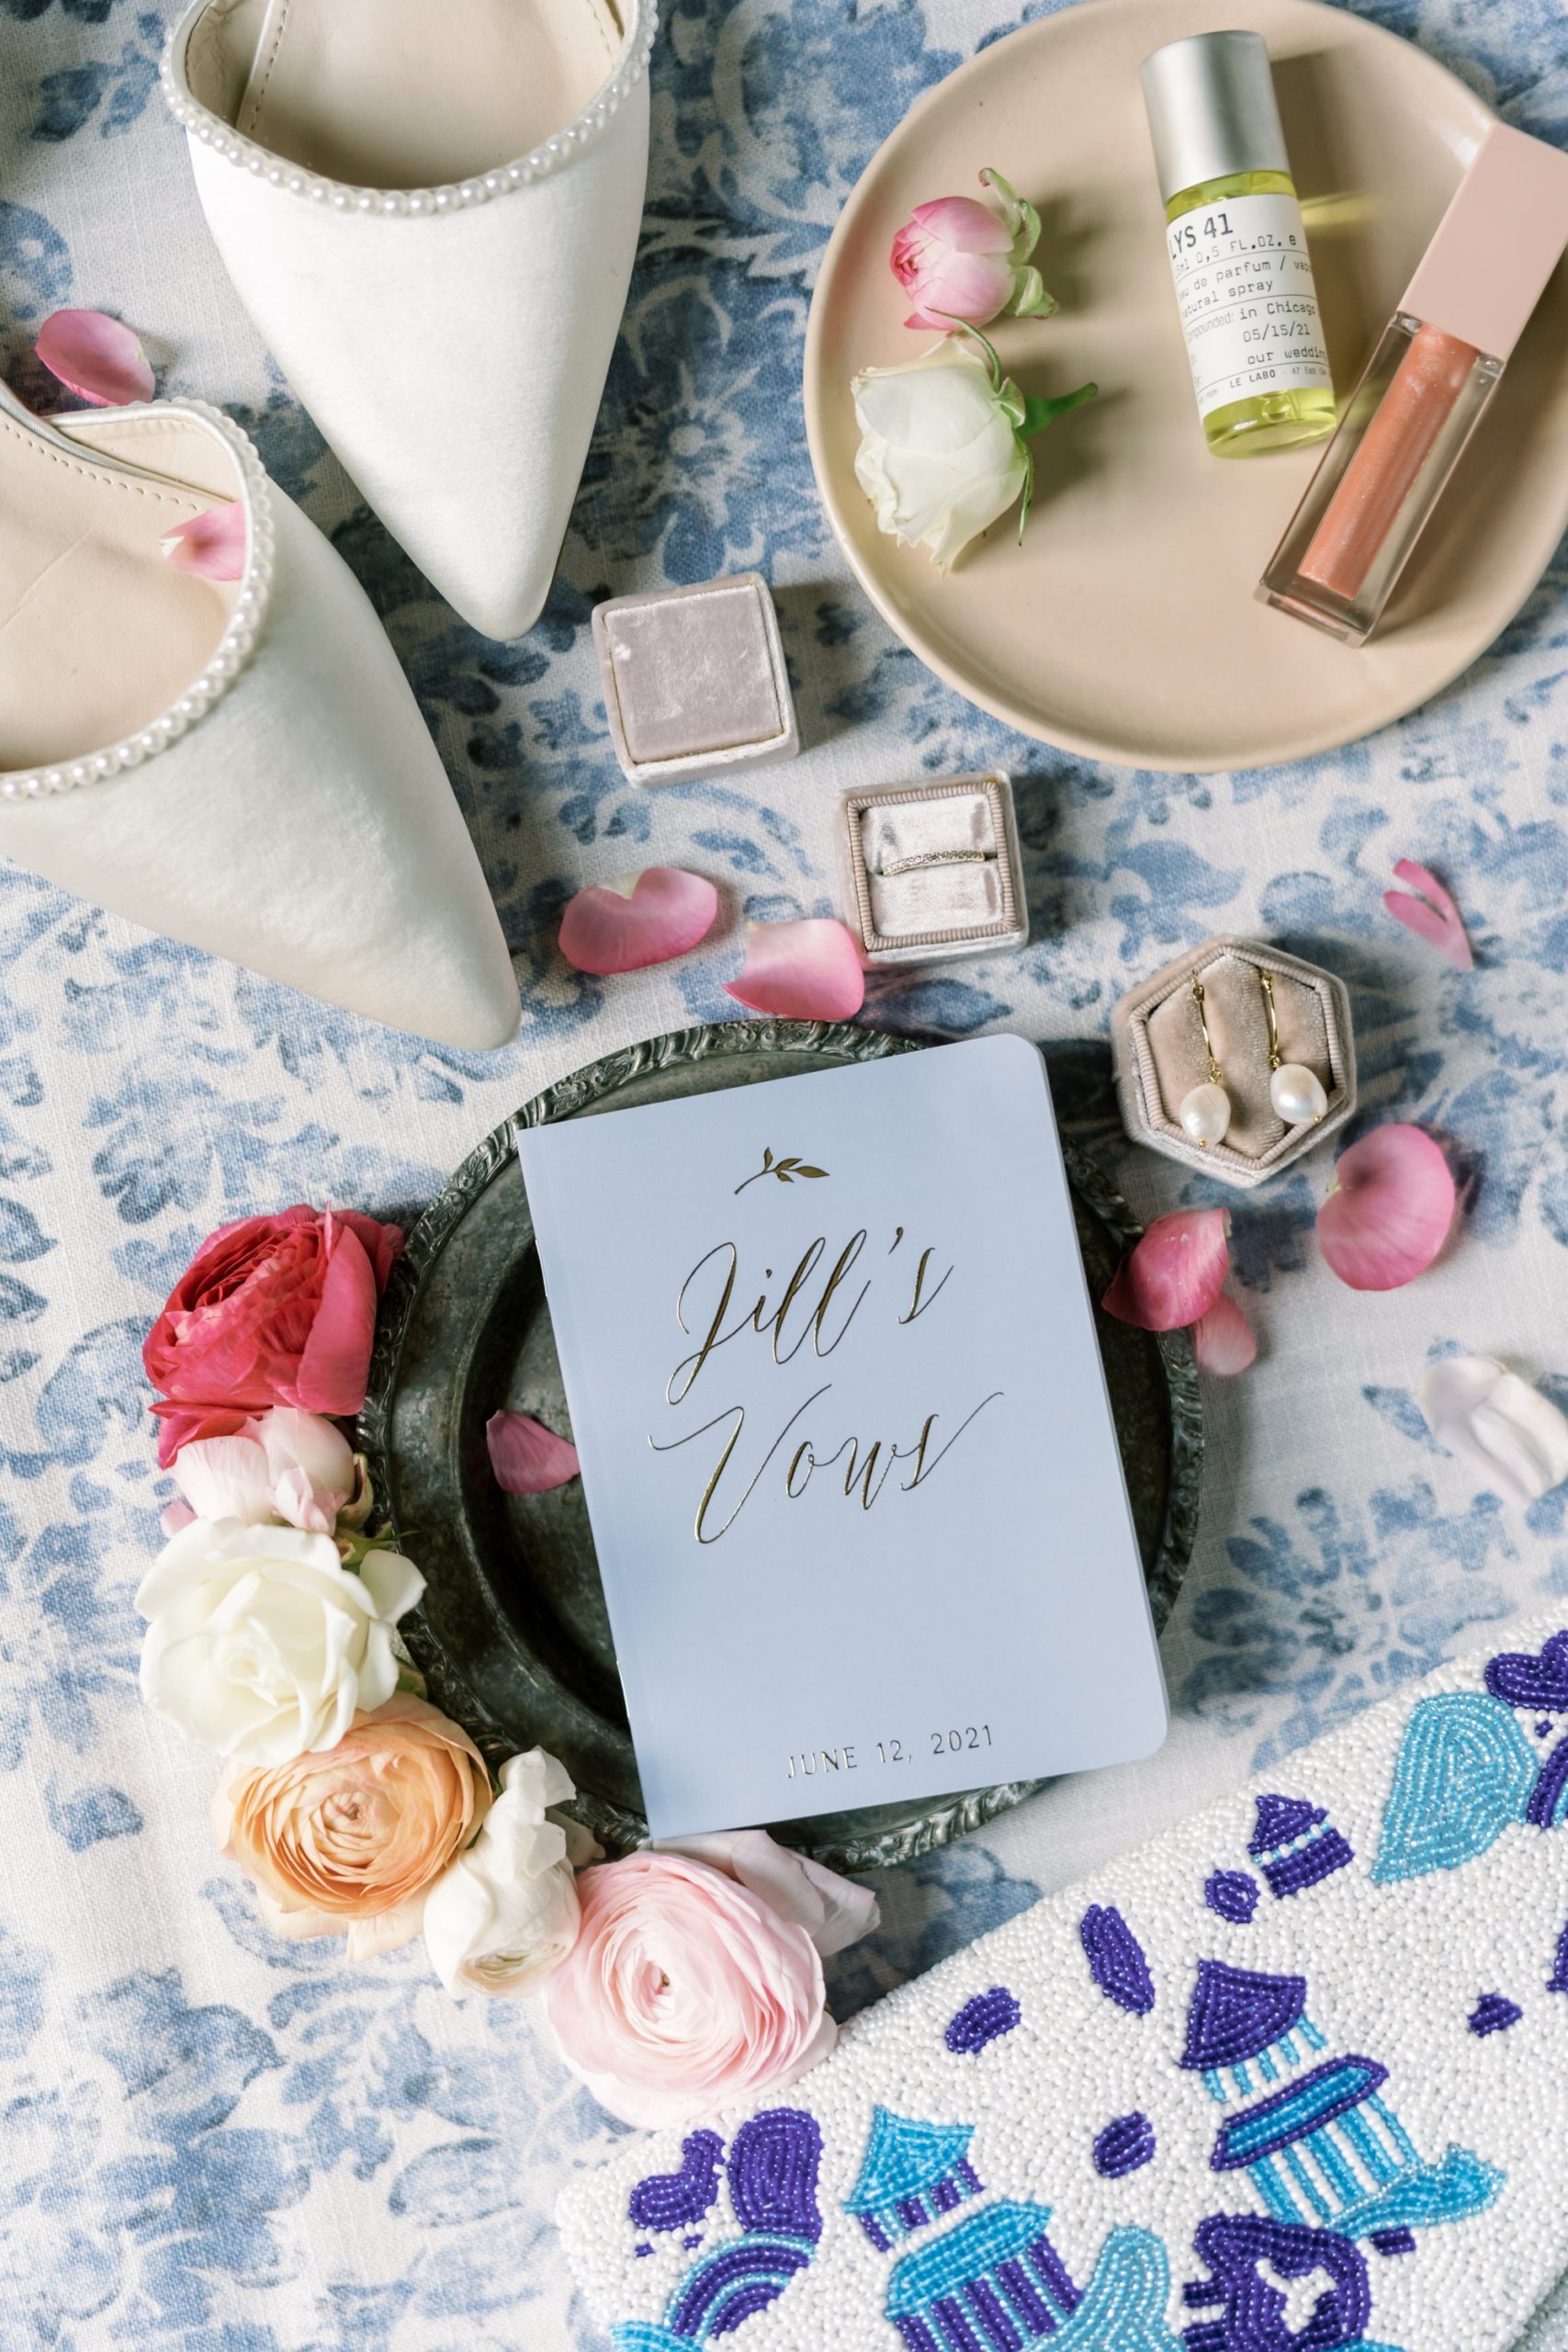 the wedding day details featured colorful florals and vow books